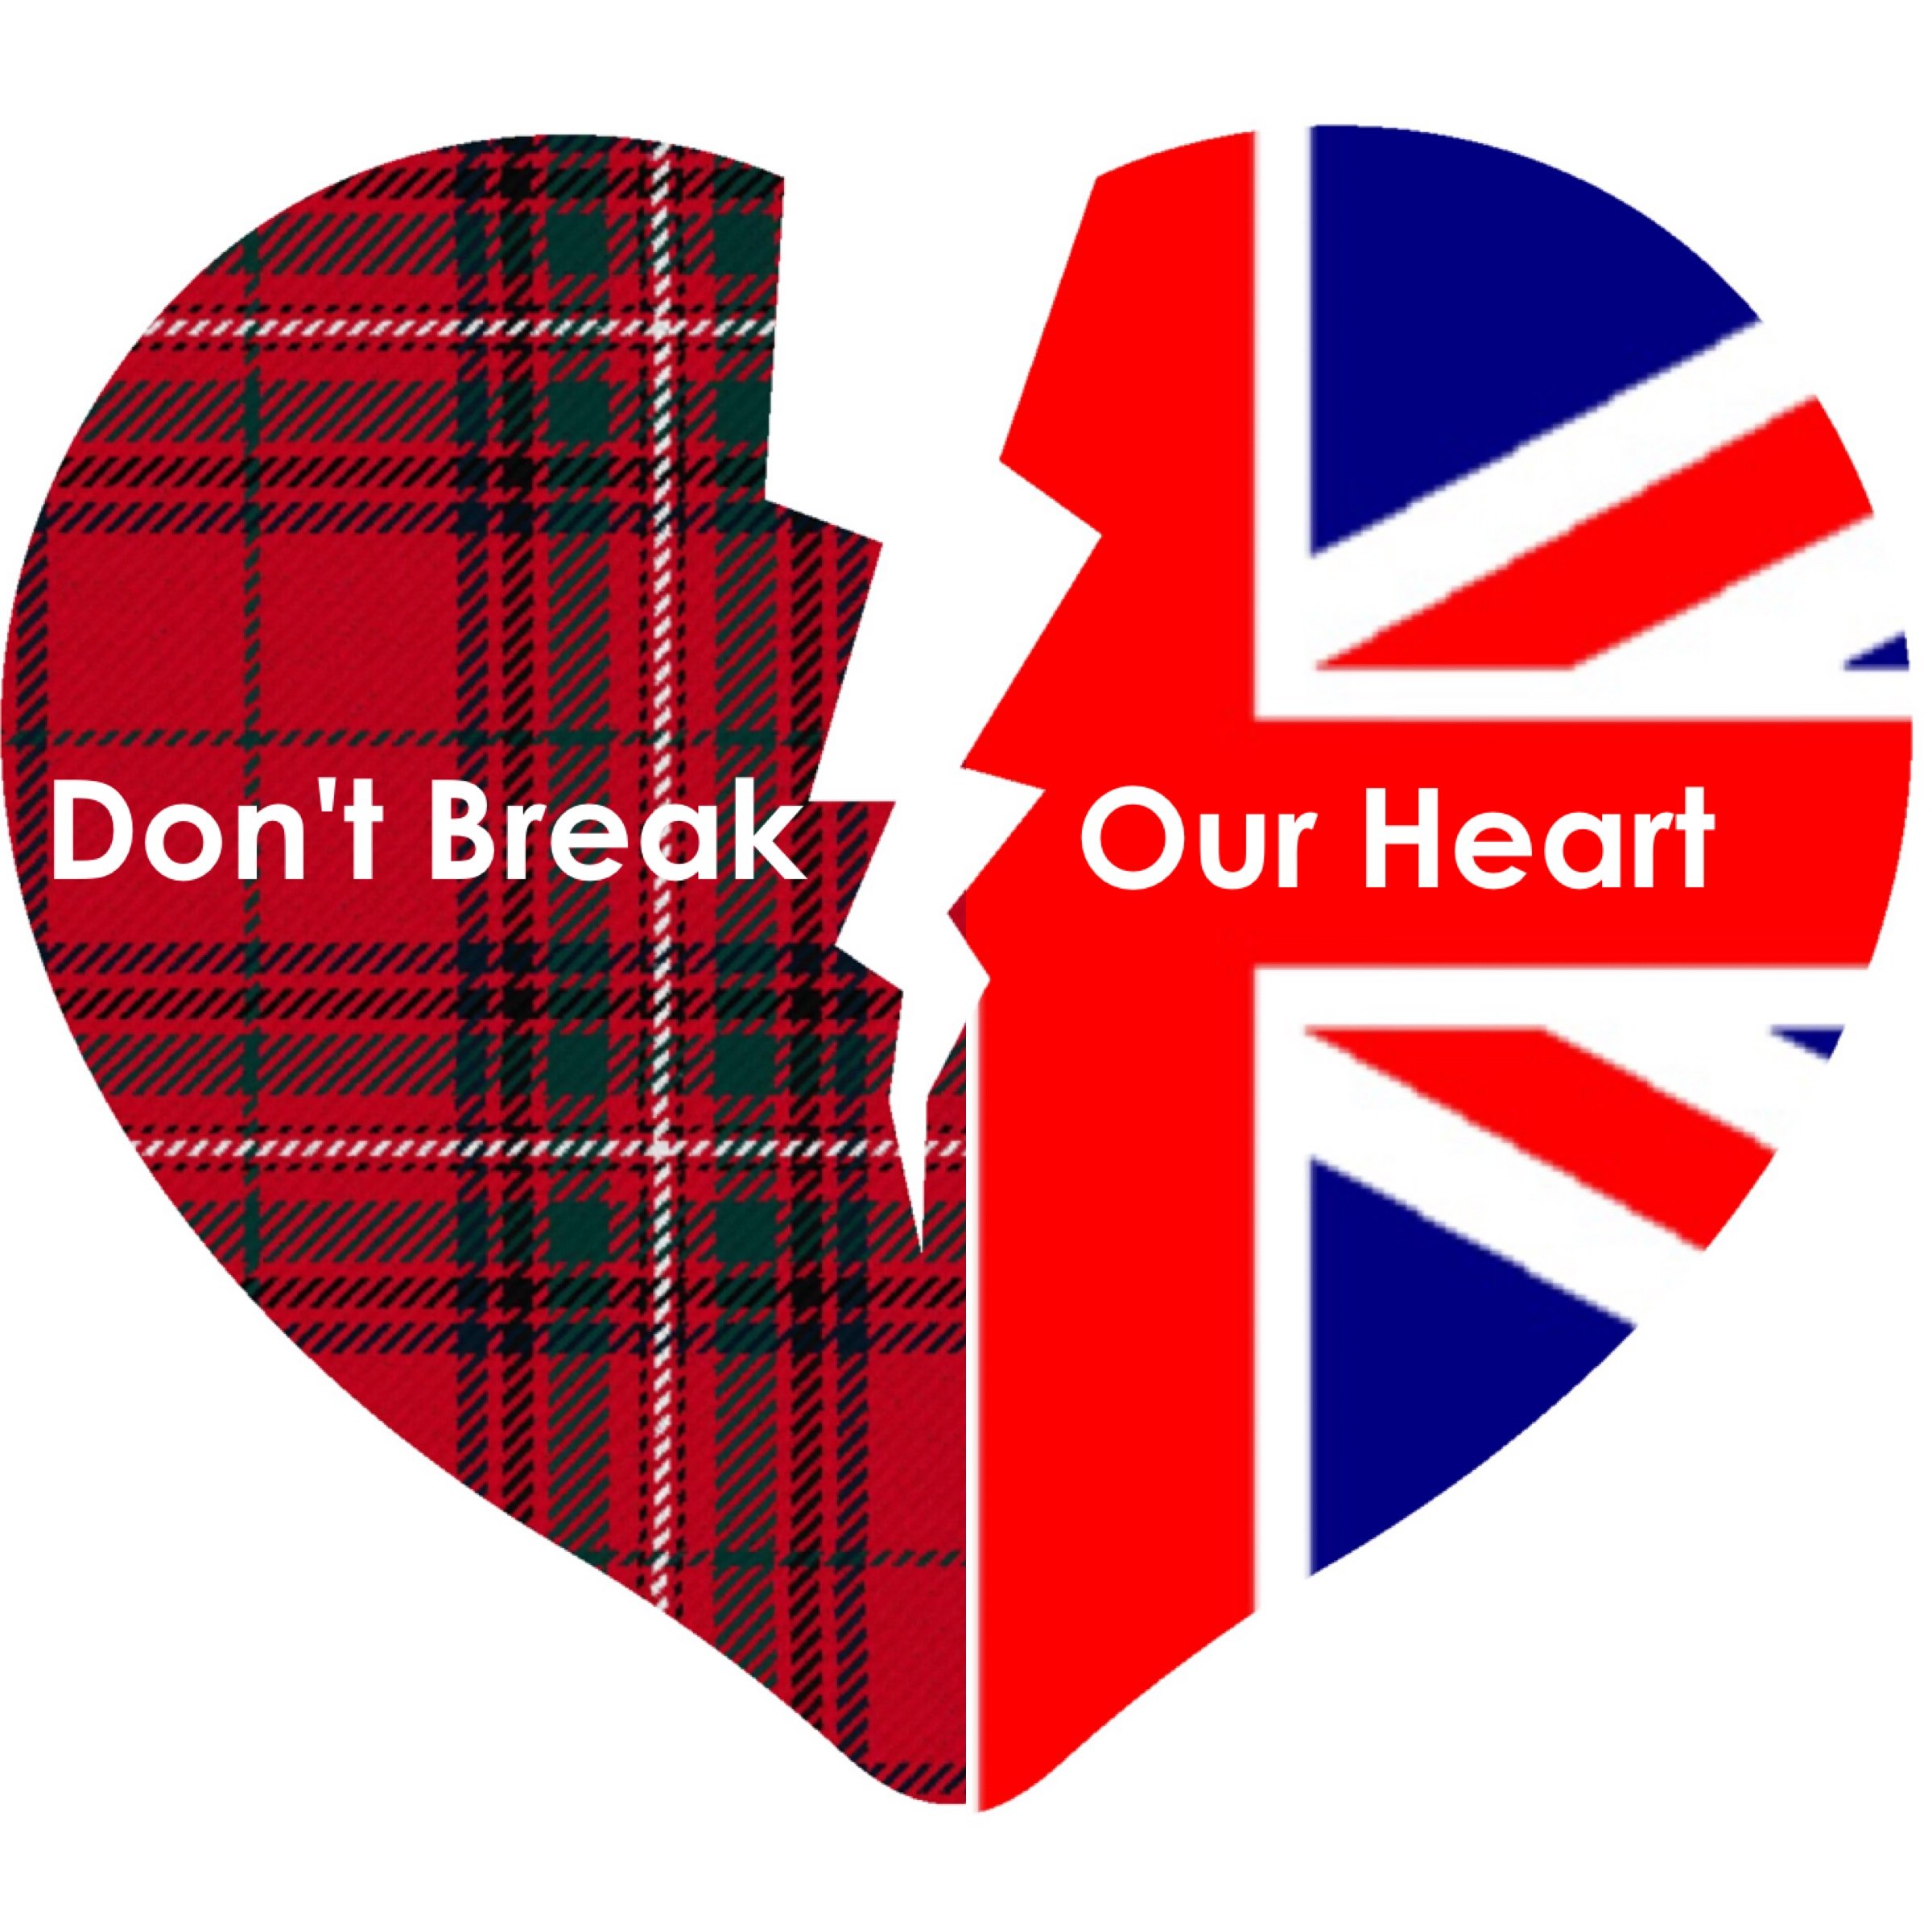 We passionately believe in retaining the Union and keeping Great Britain GREAT! Join us on Facebook and Instagram @dboheart. Vote NO on September 18th!